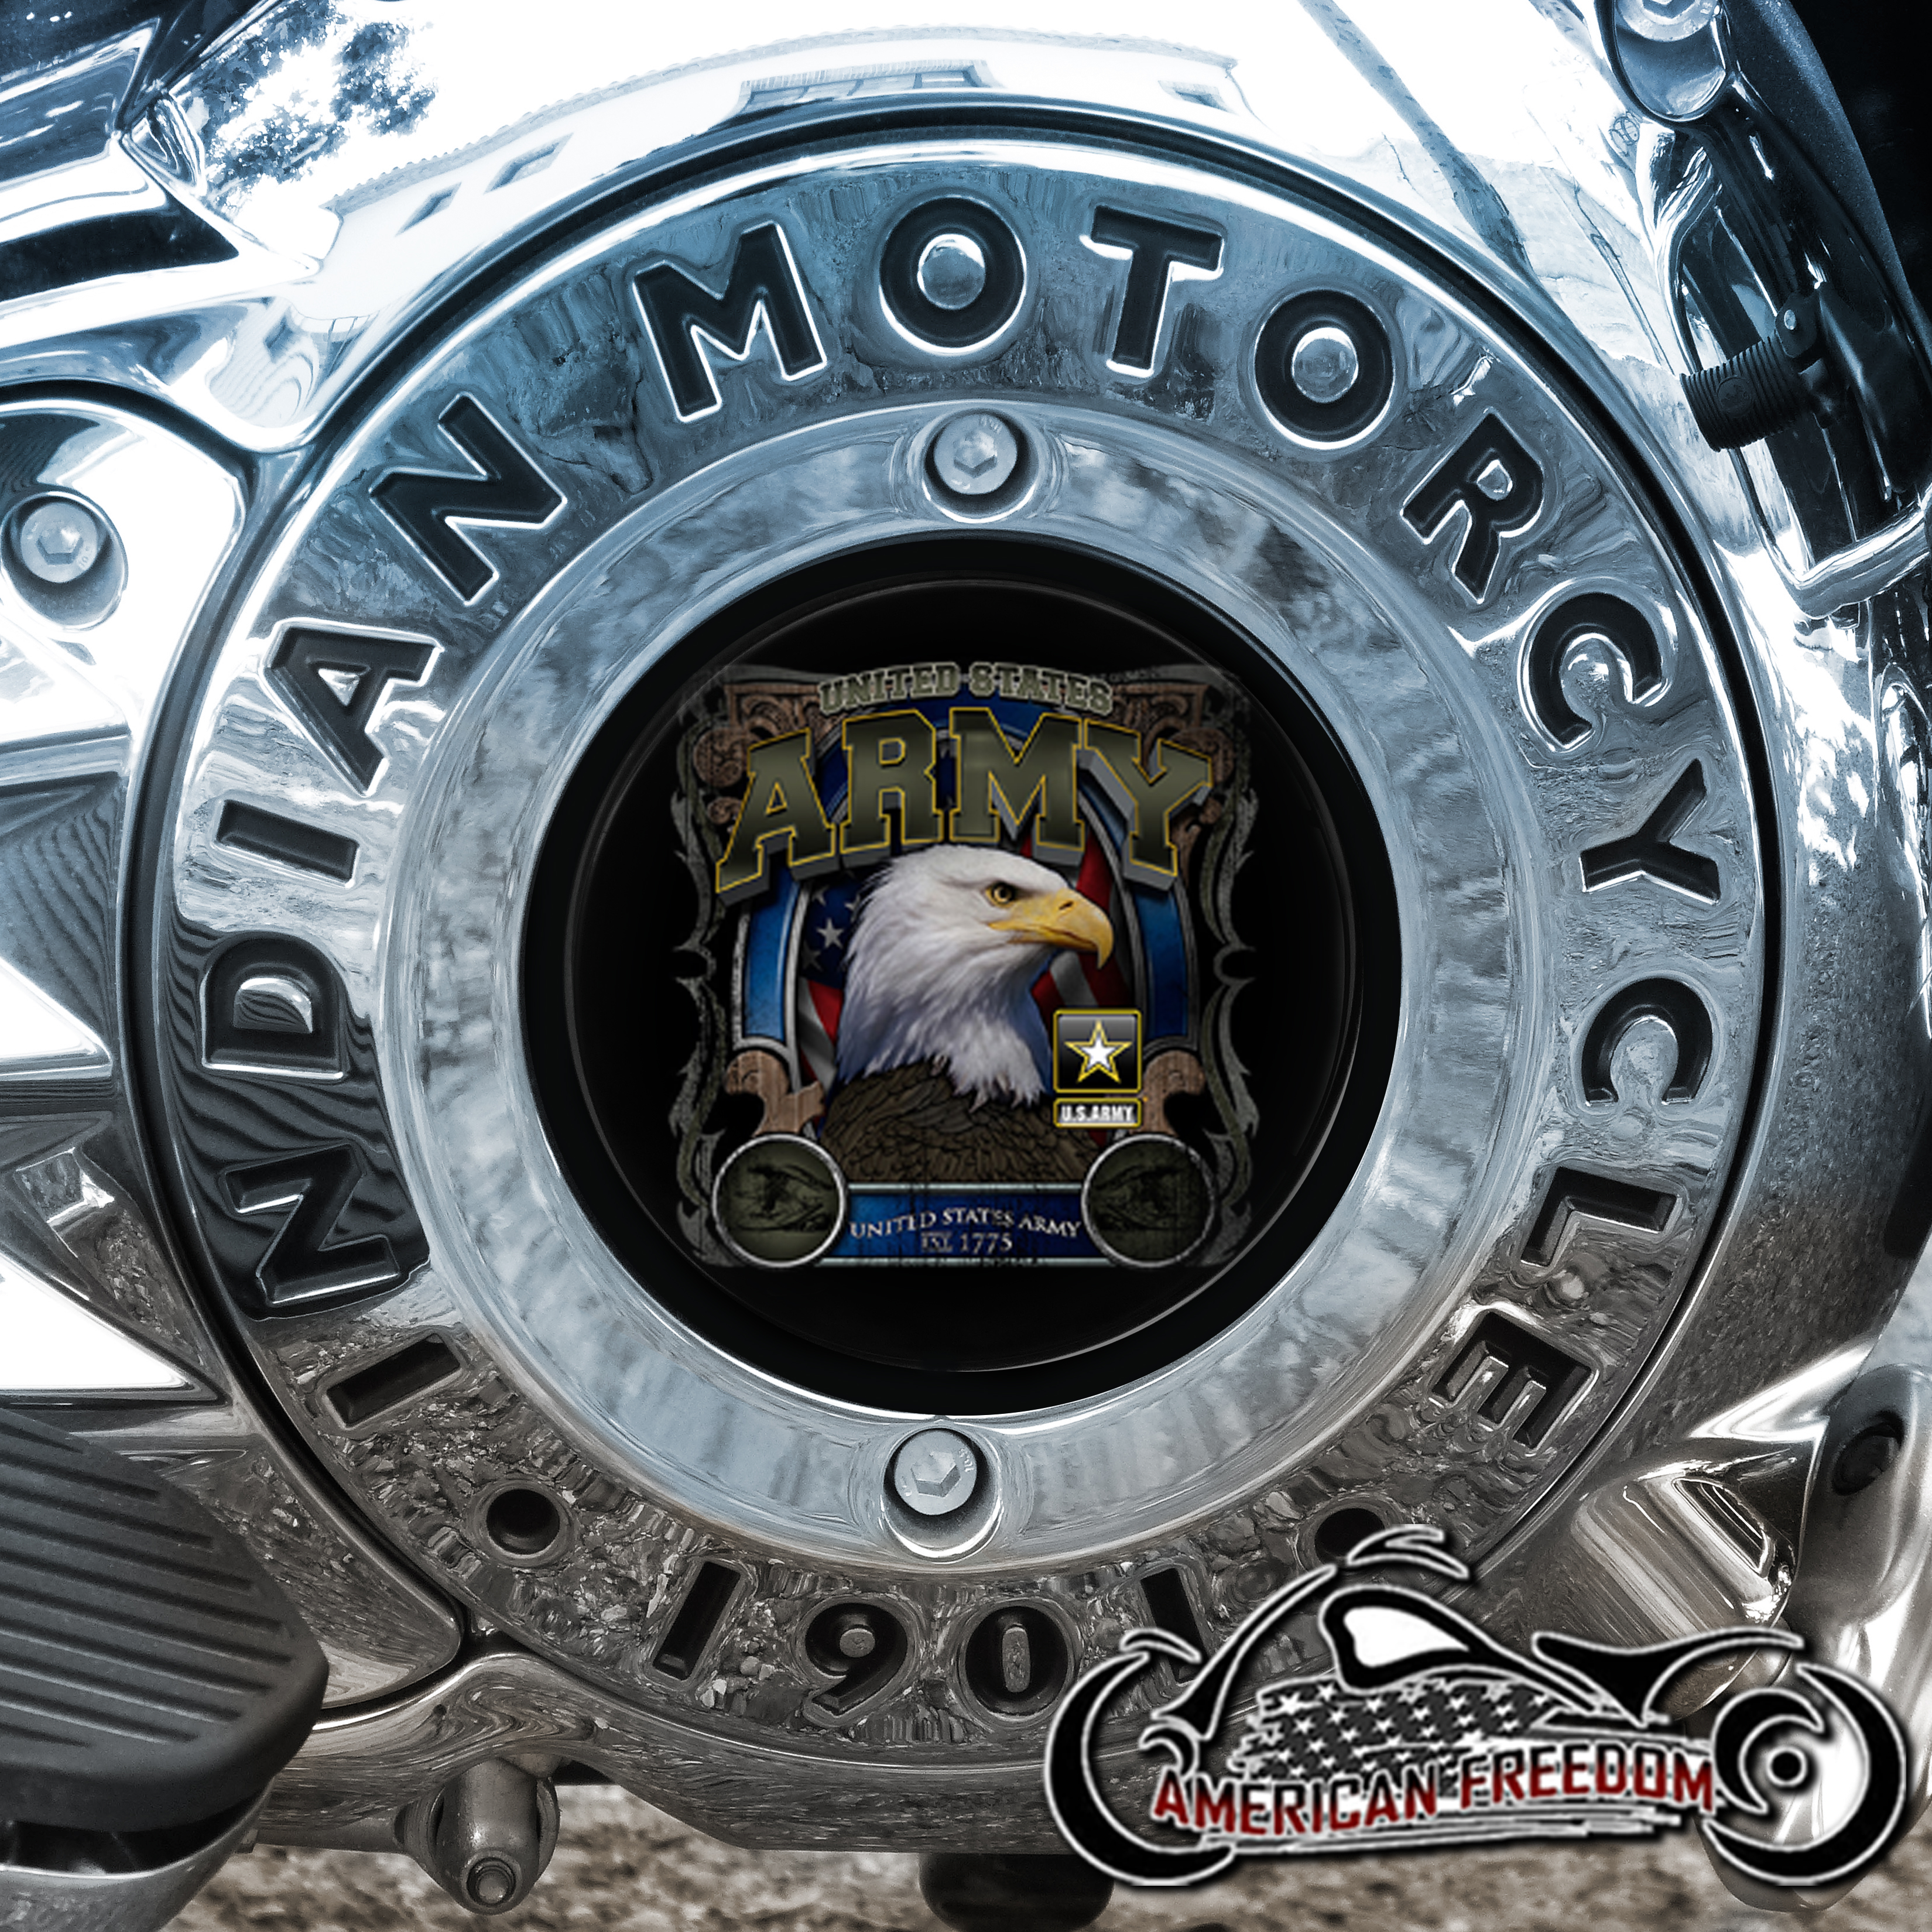 Indian Motorcycles Thunder Stroke Derby Insert - Army 1775